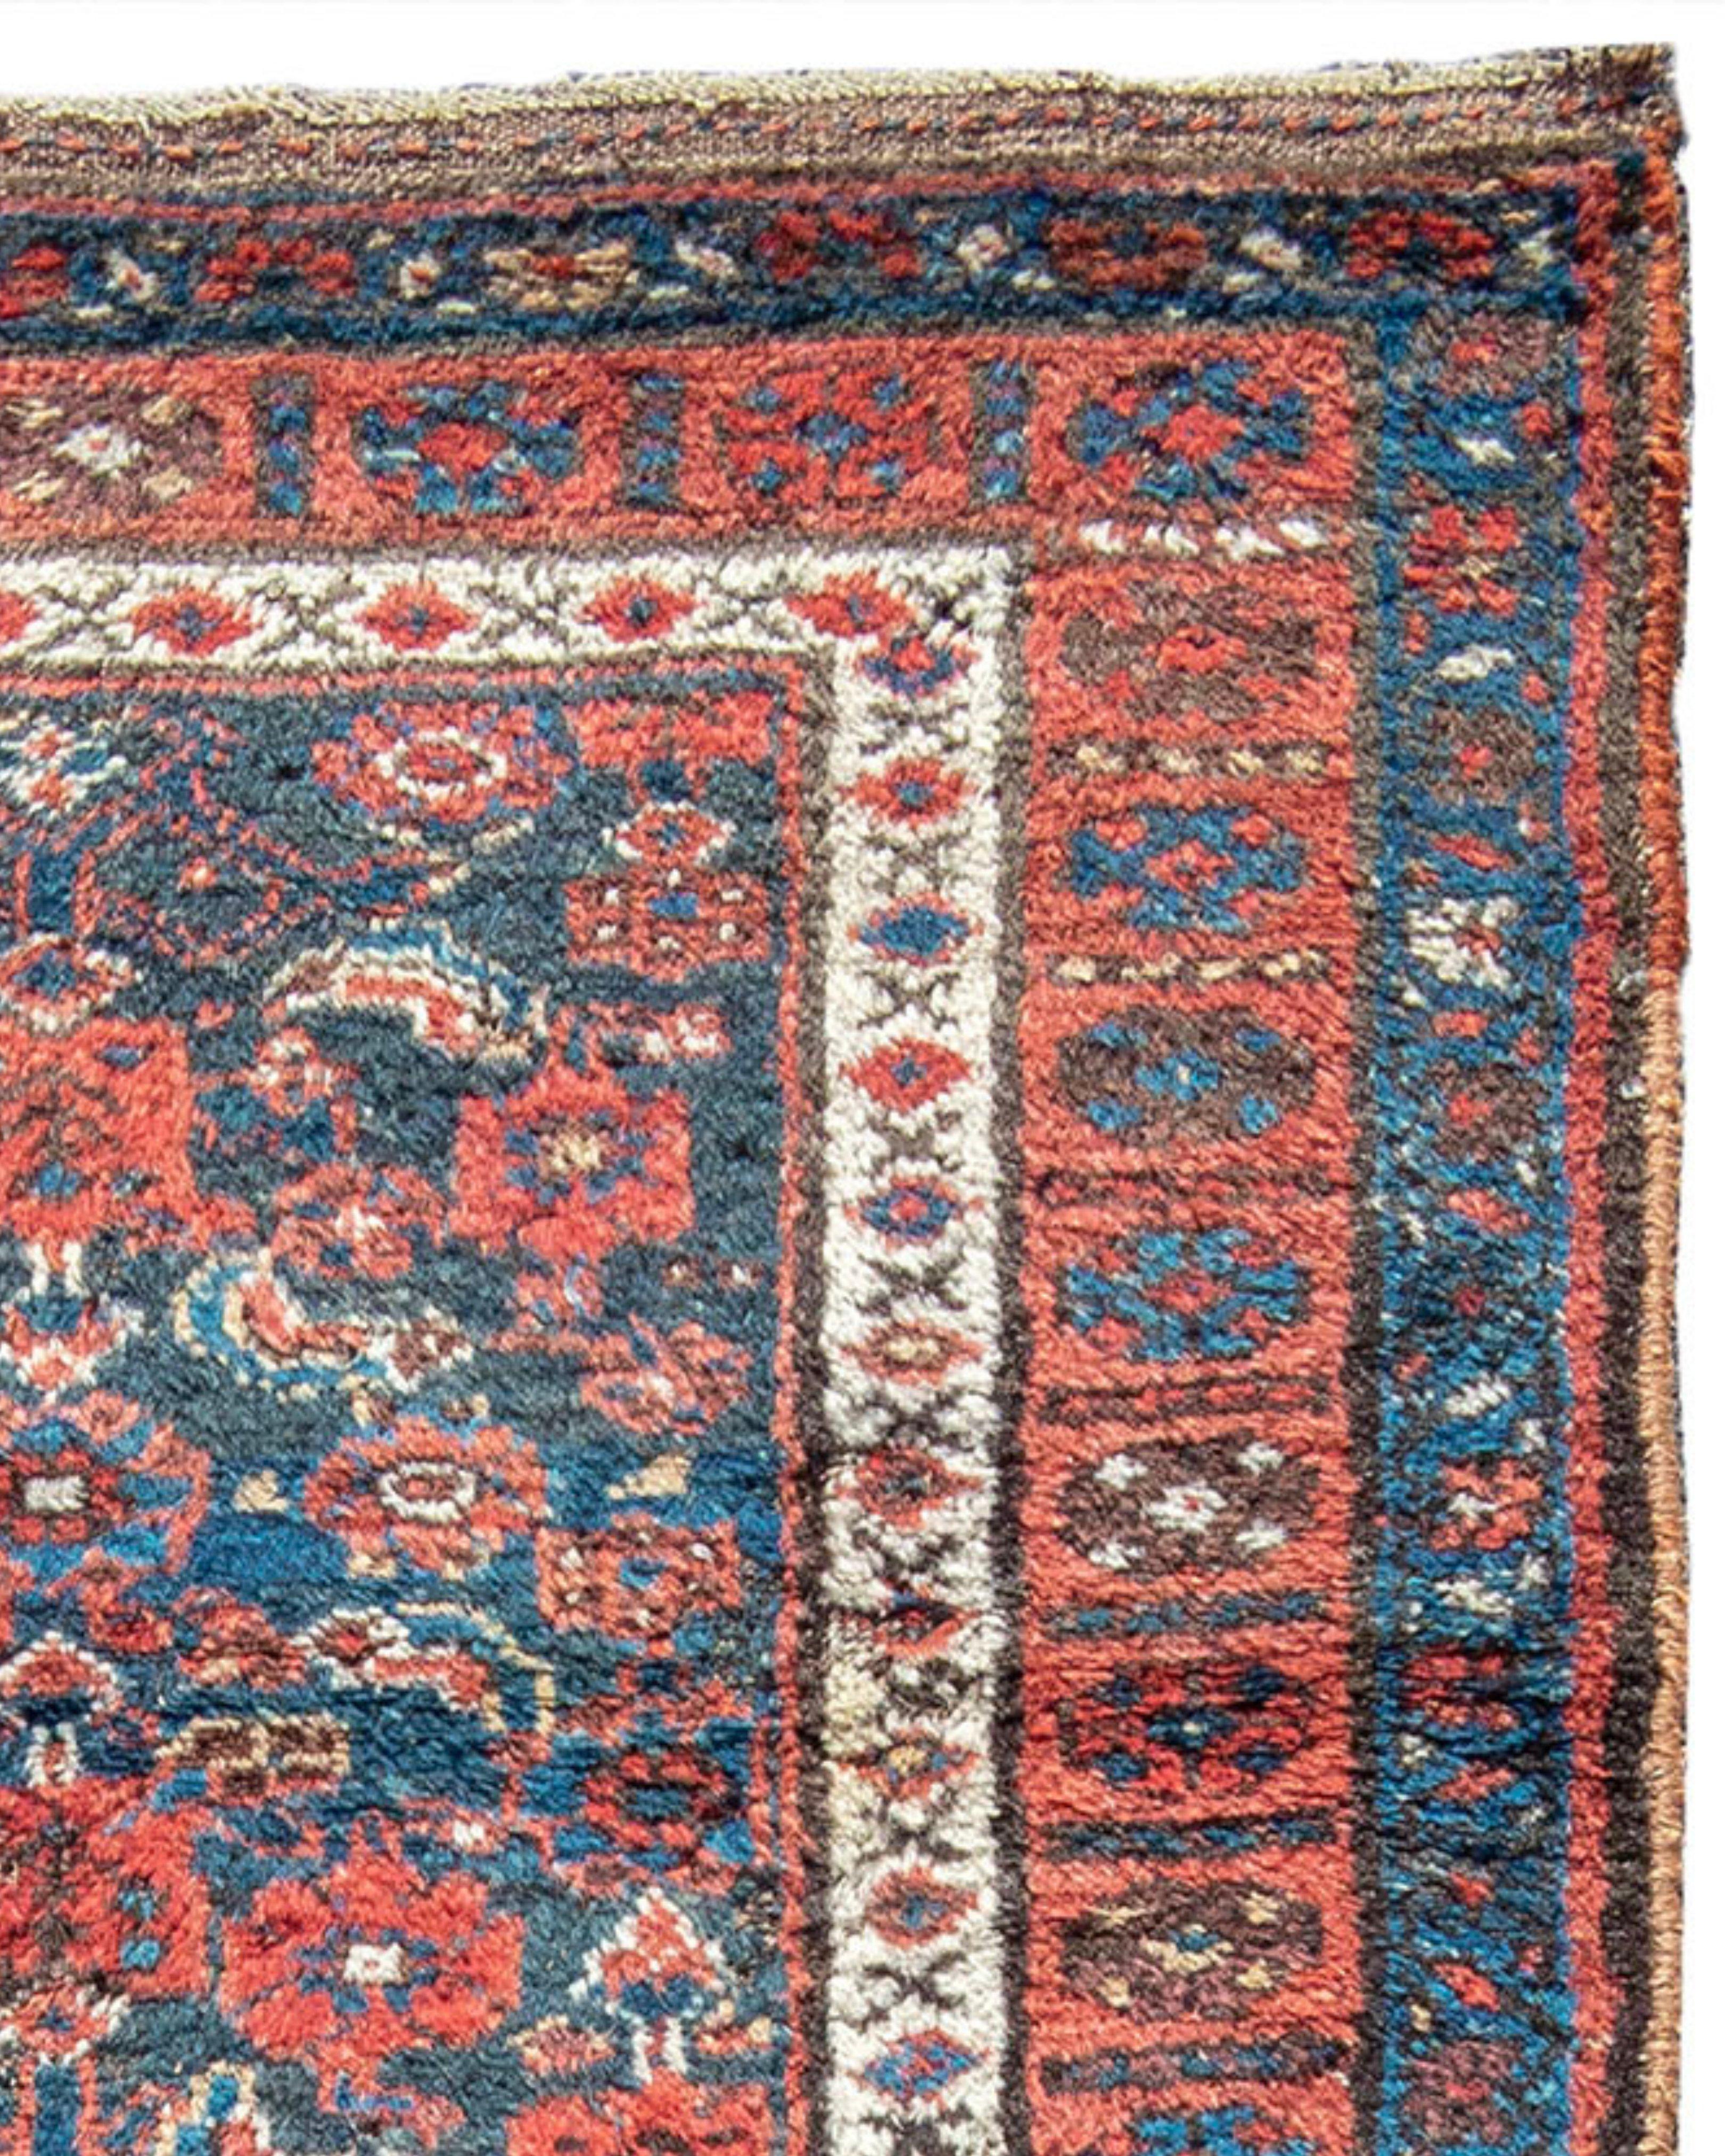 Kurdish Rug, c. 1900. 

Slight wear and a small break in selvedge to be repaired at point of sale.

Additional Information:
Dimensions: 3'9